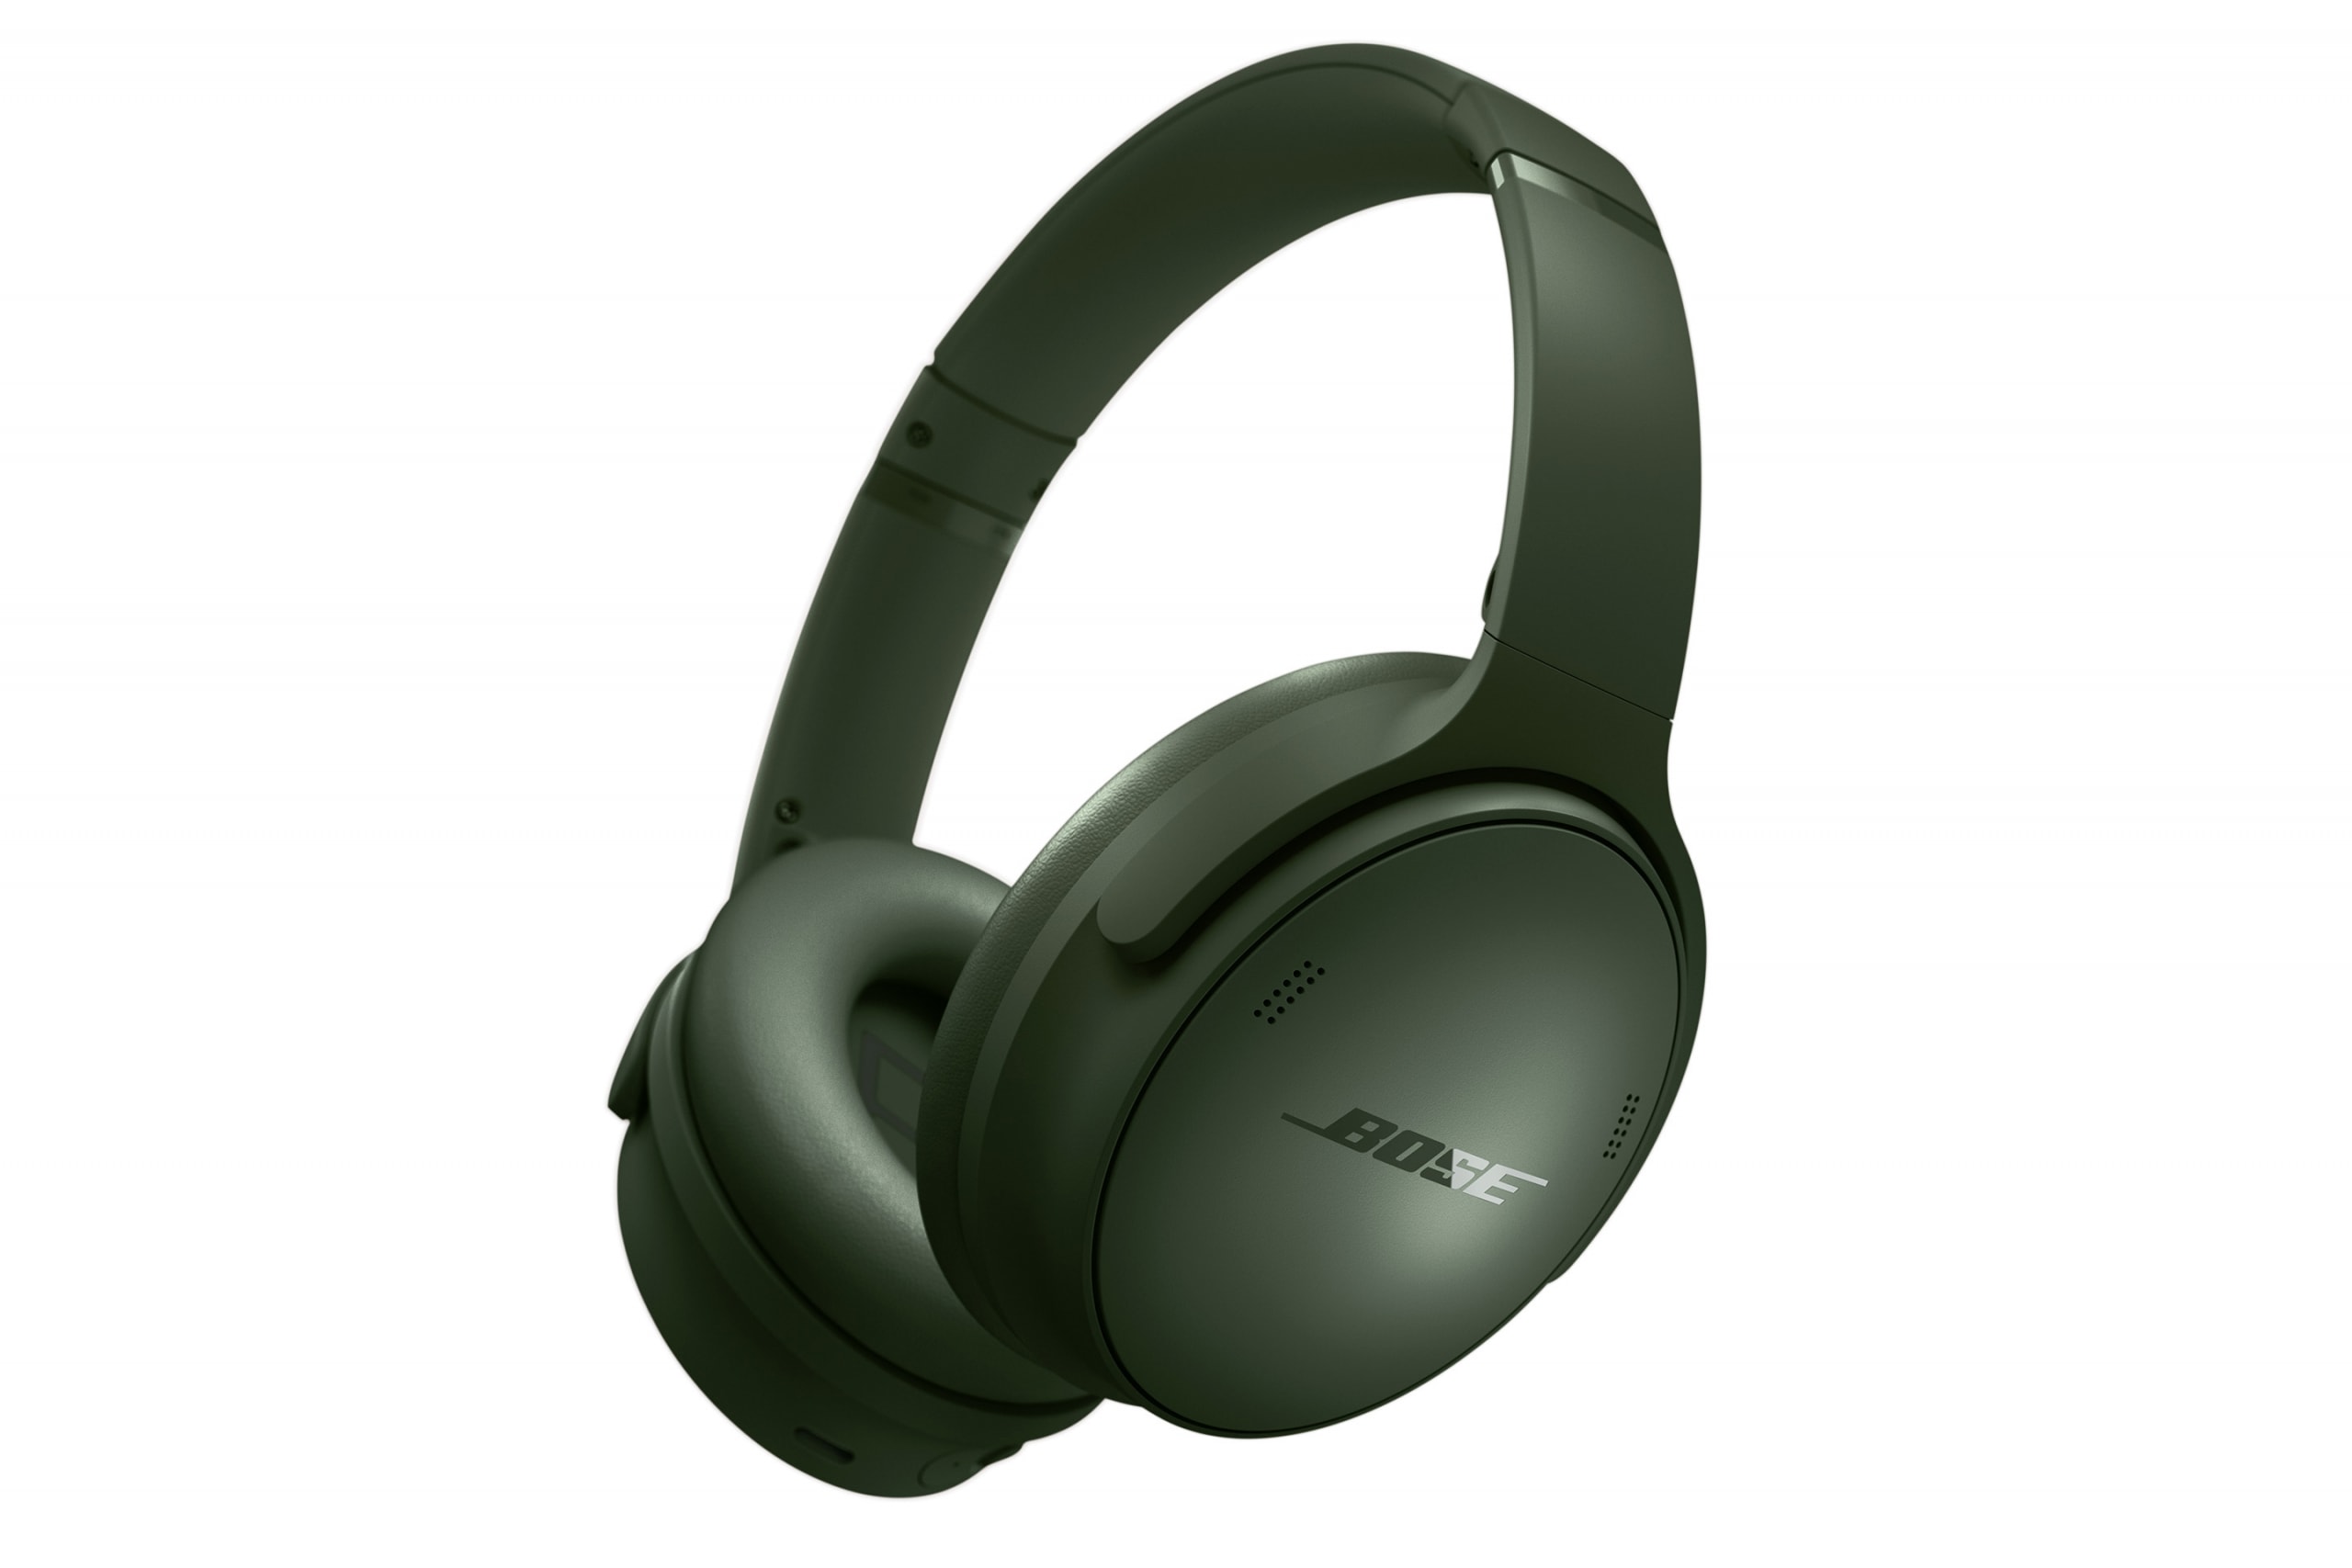 Bose Debuts New Headphone Trio: Hands-On With New QuietComfort Ultra  Headphones and Earbuds - CNET